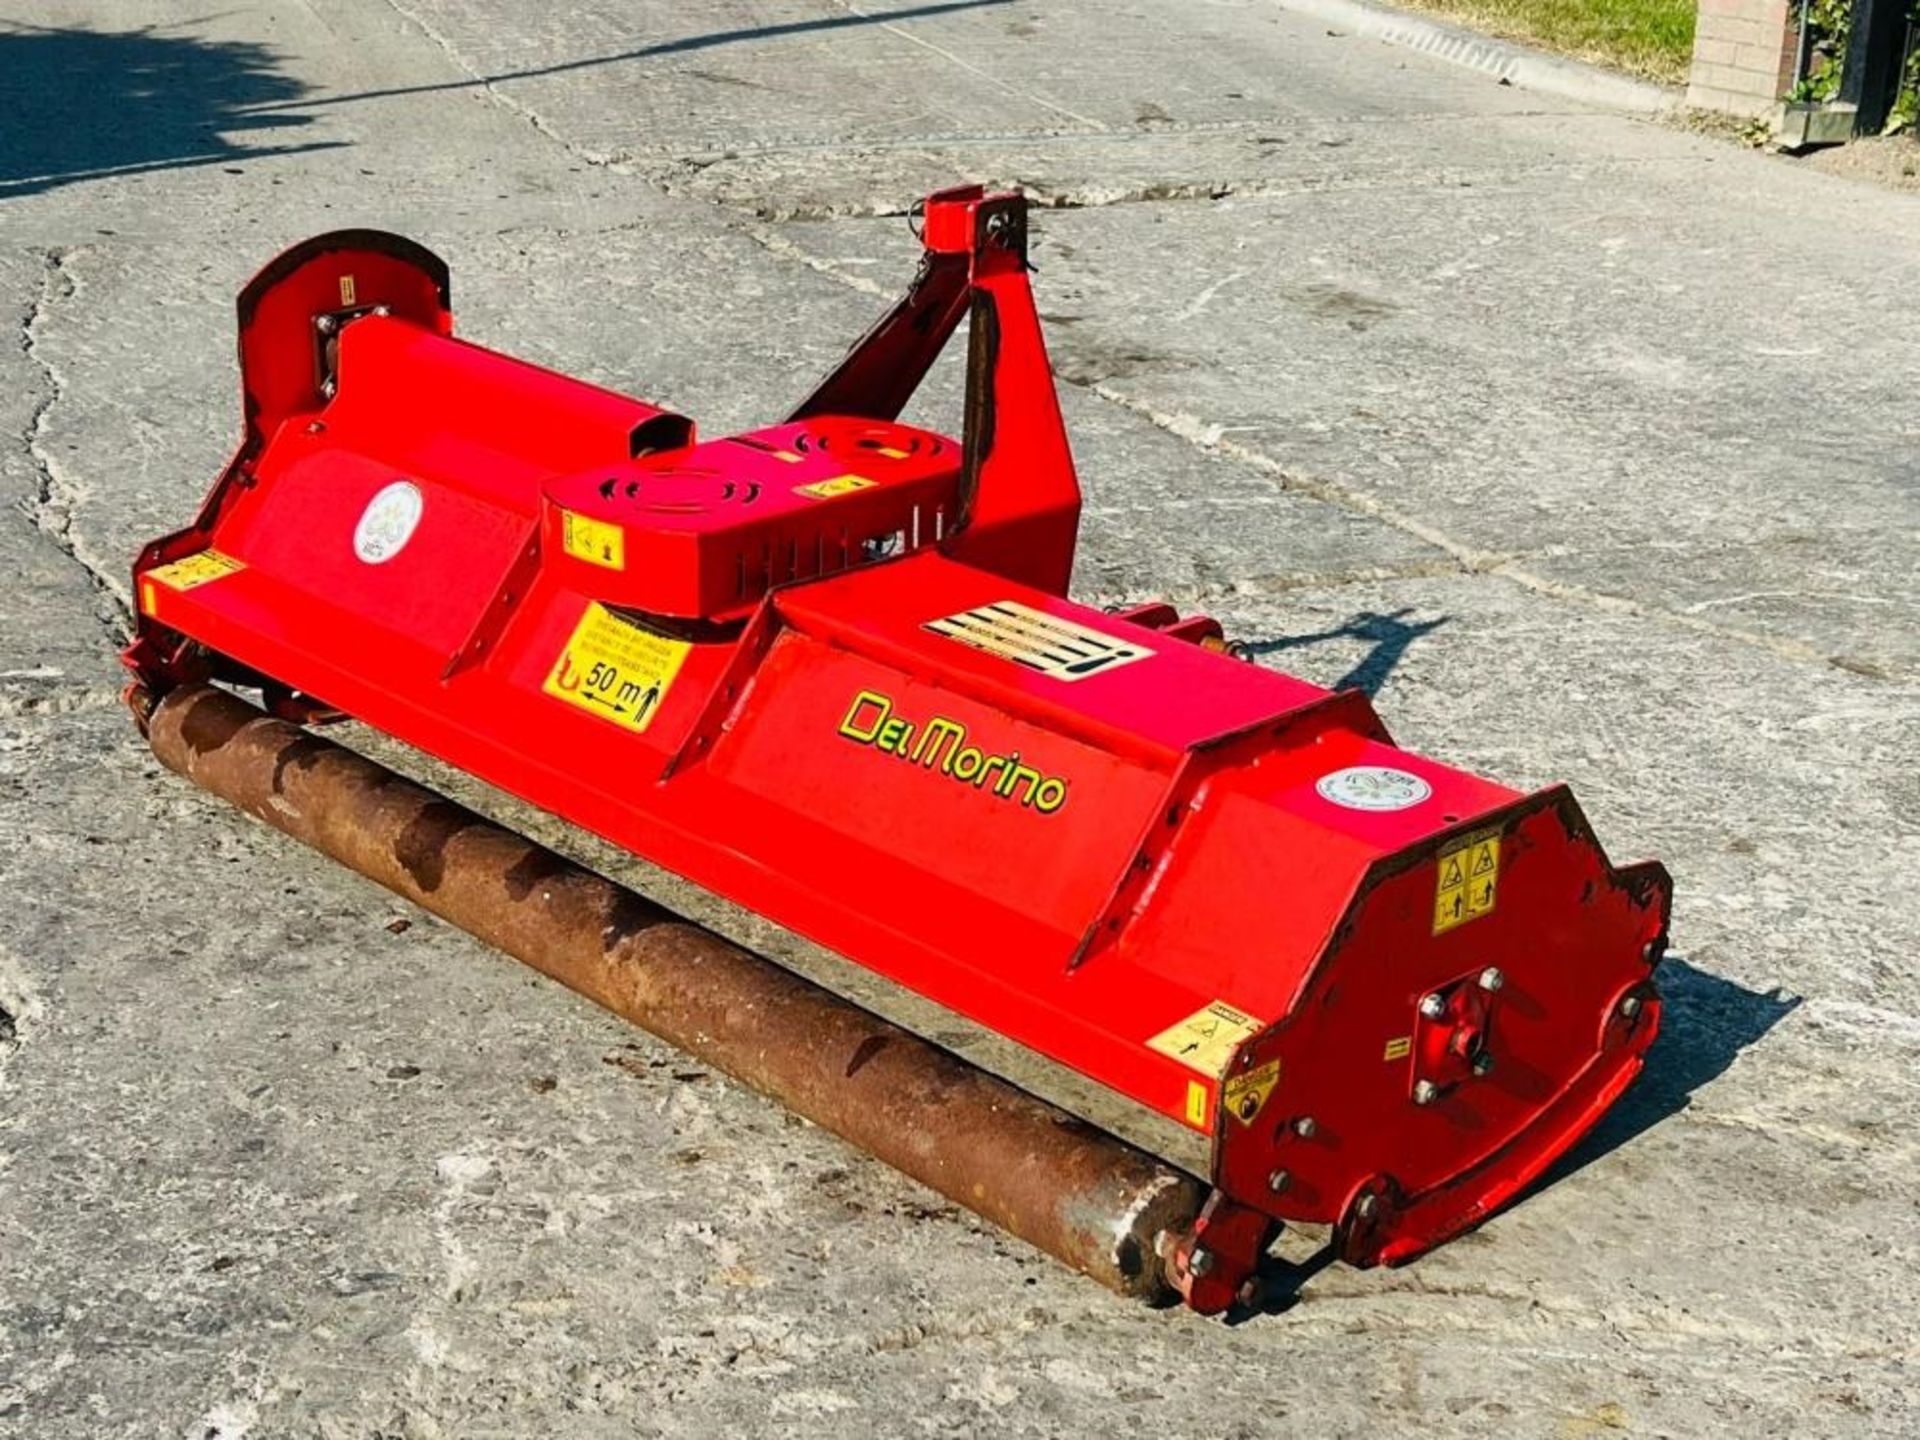 DELMORINO FLIPPER 186 FLAIL MOWER *YEAR 2020, SPARE AND REPAIRS* C/W ROLLER